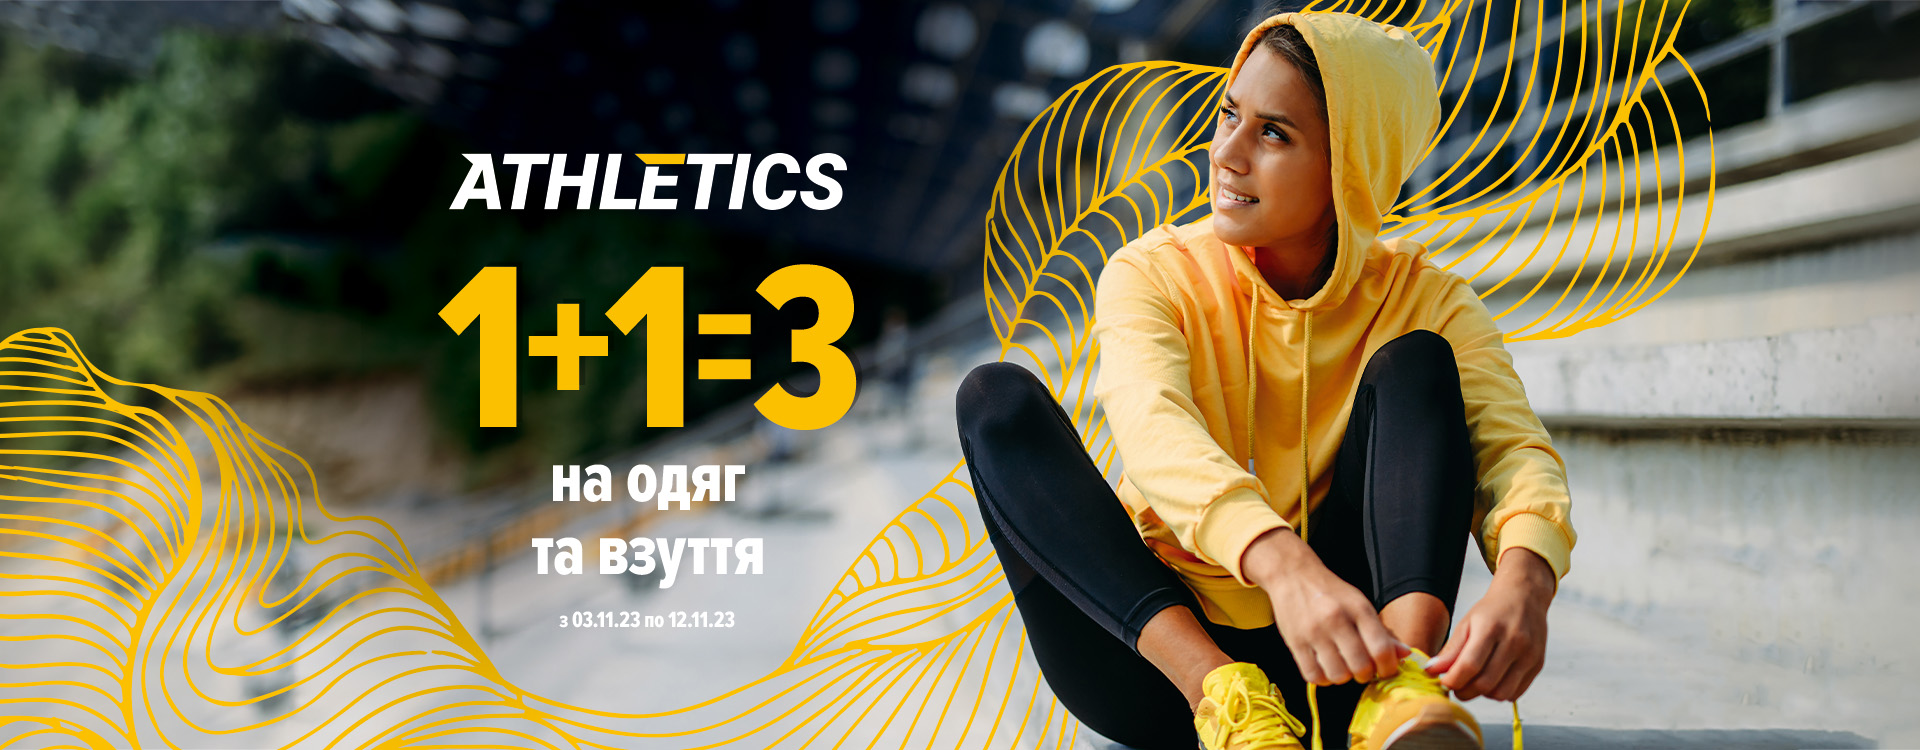 1+1=3 on clothes and shoes at ATHLETICS